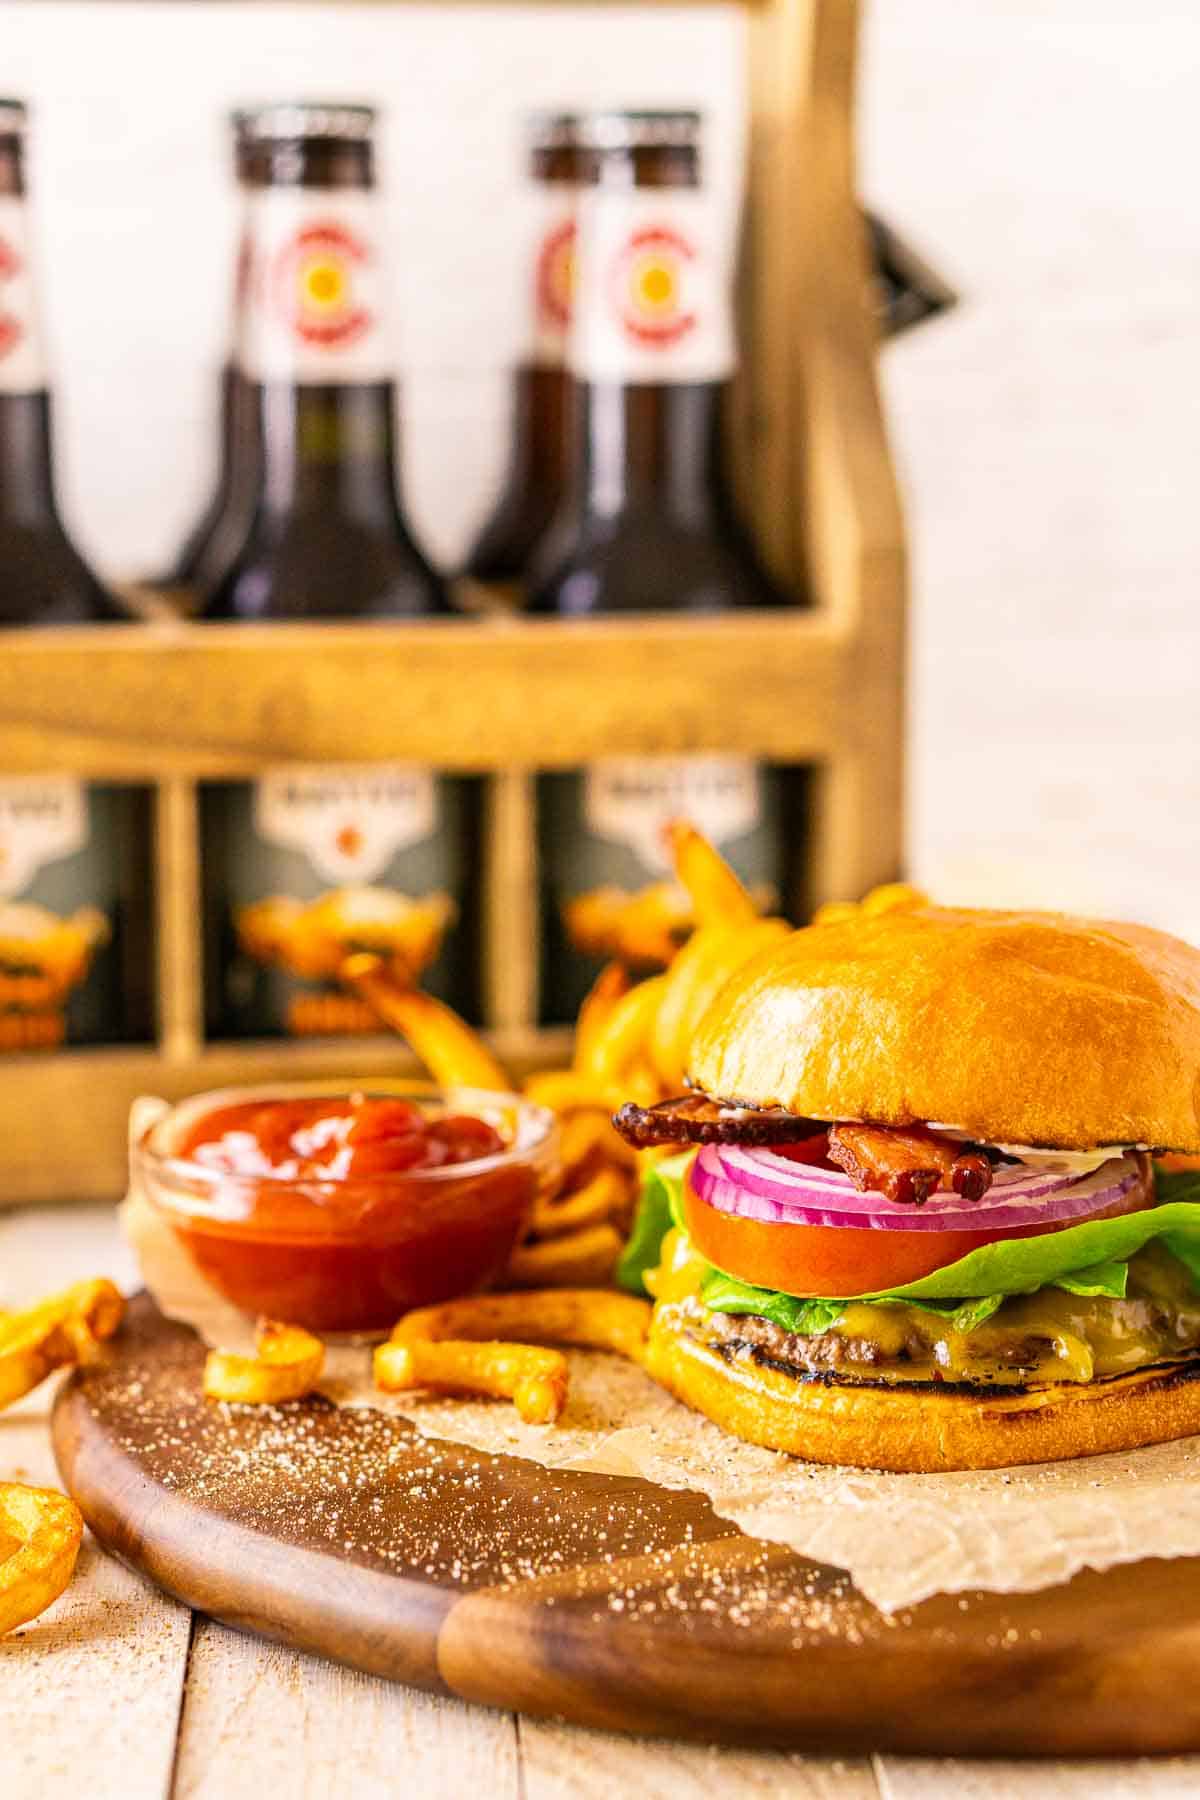 The Wagyu burgers on a wooden plate with parchment paper and a six pack of beer in the background.